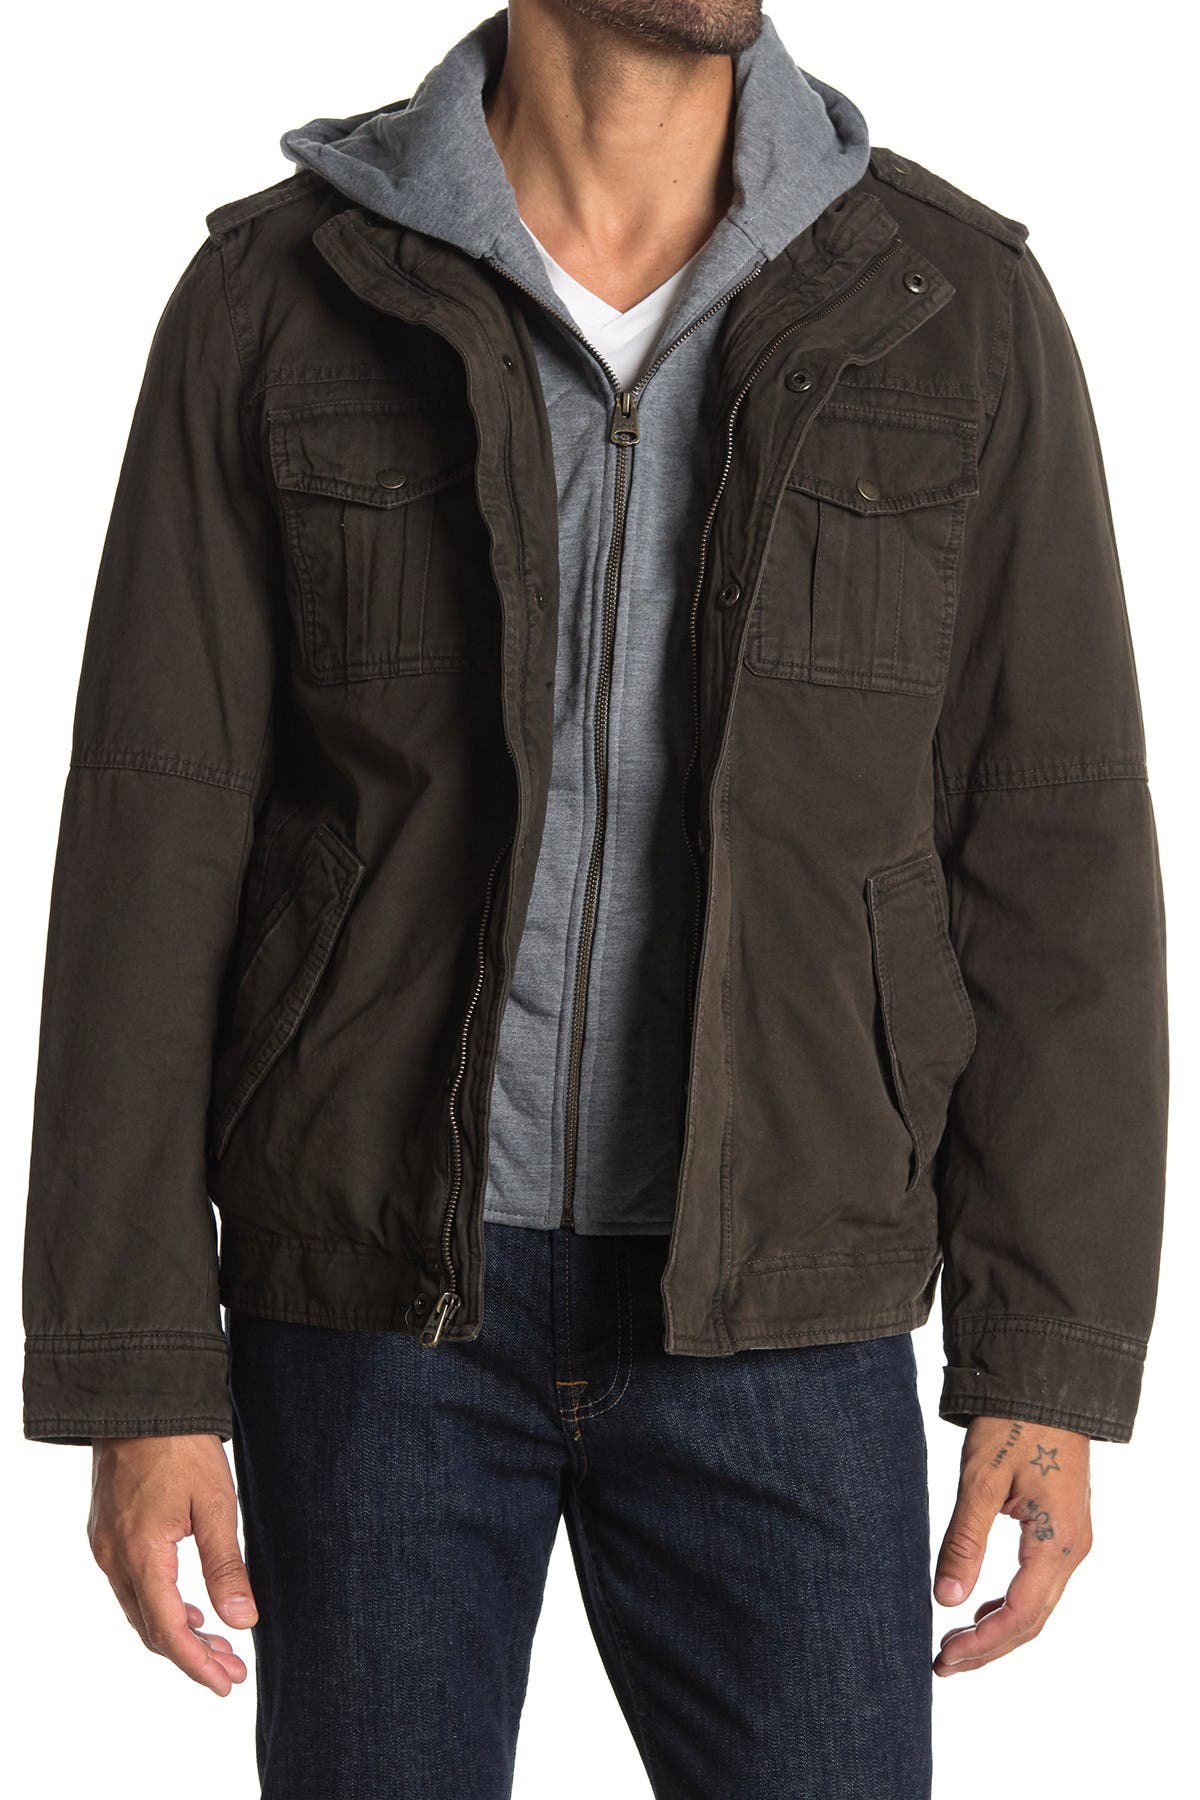 Levi's Men's Wool Blend Military Jacket With Hood Germany, SAVE 38% -  